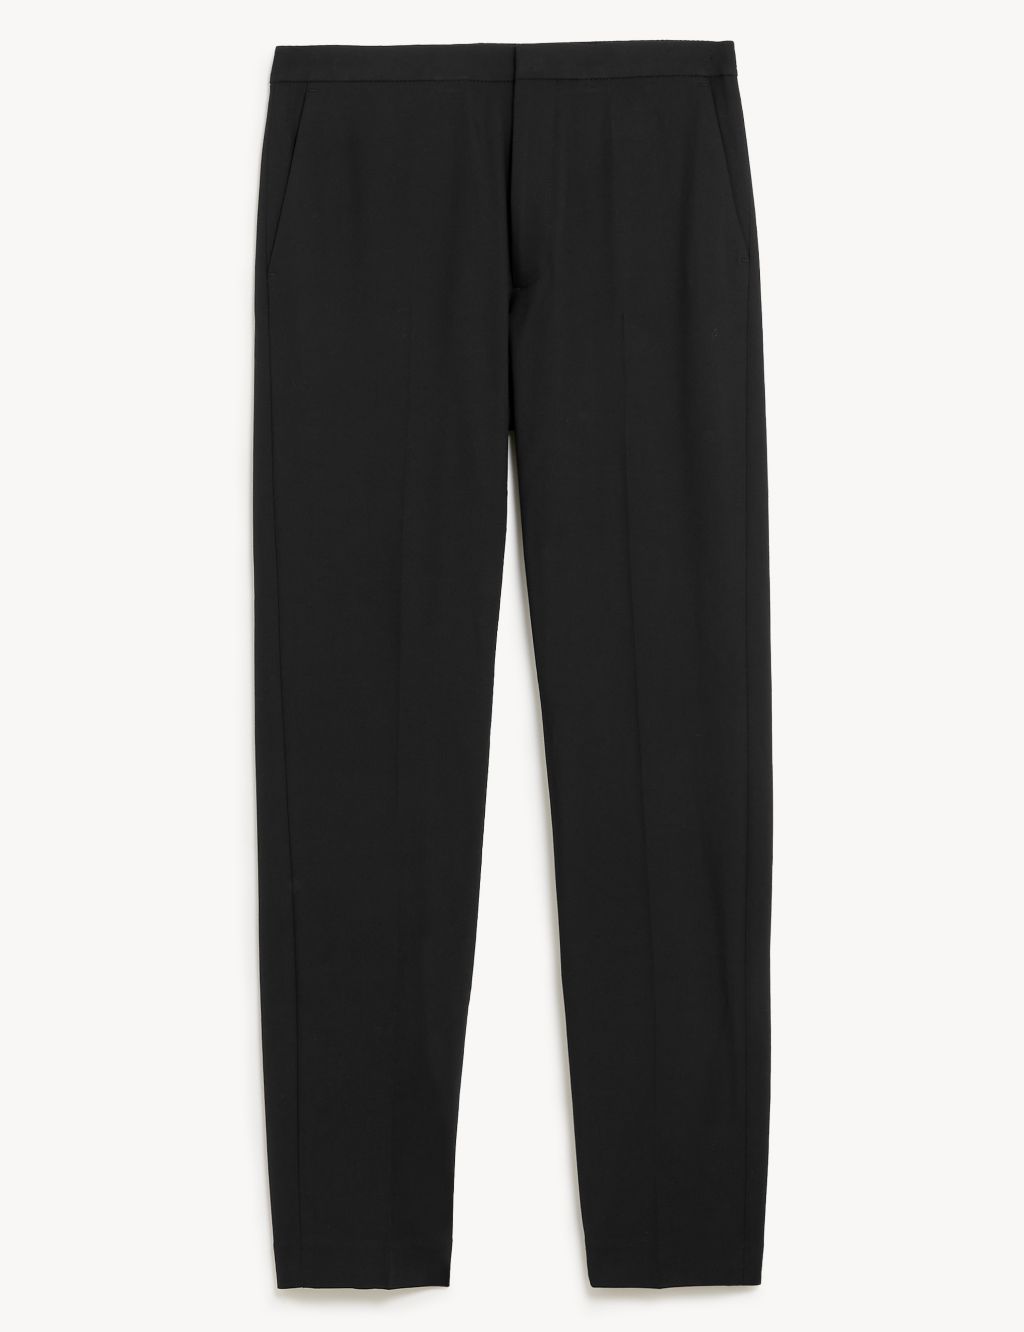 Textured 360 Flex™ Trousers image 3